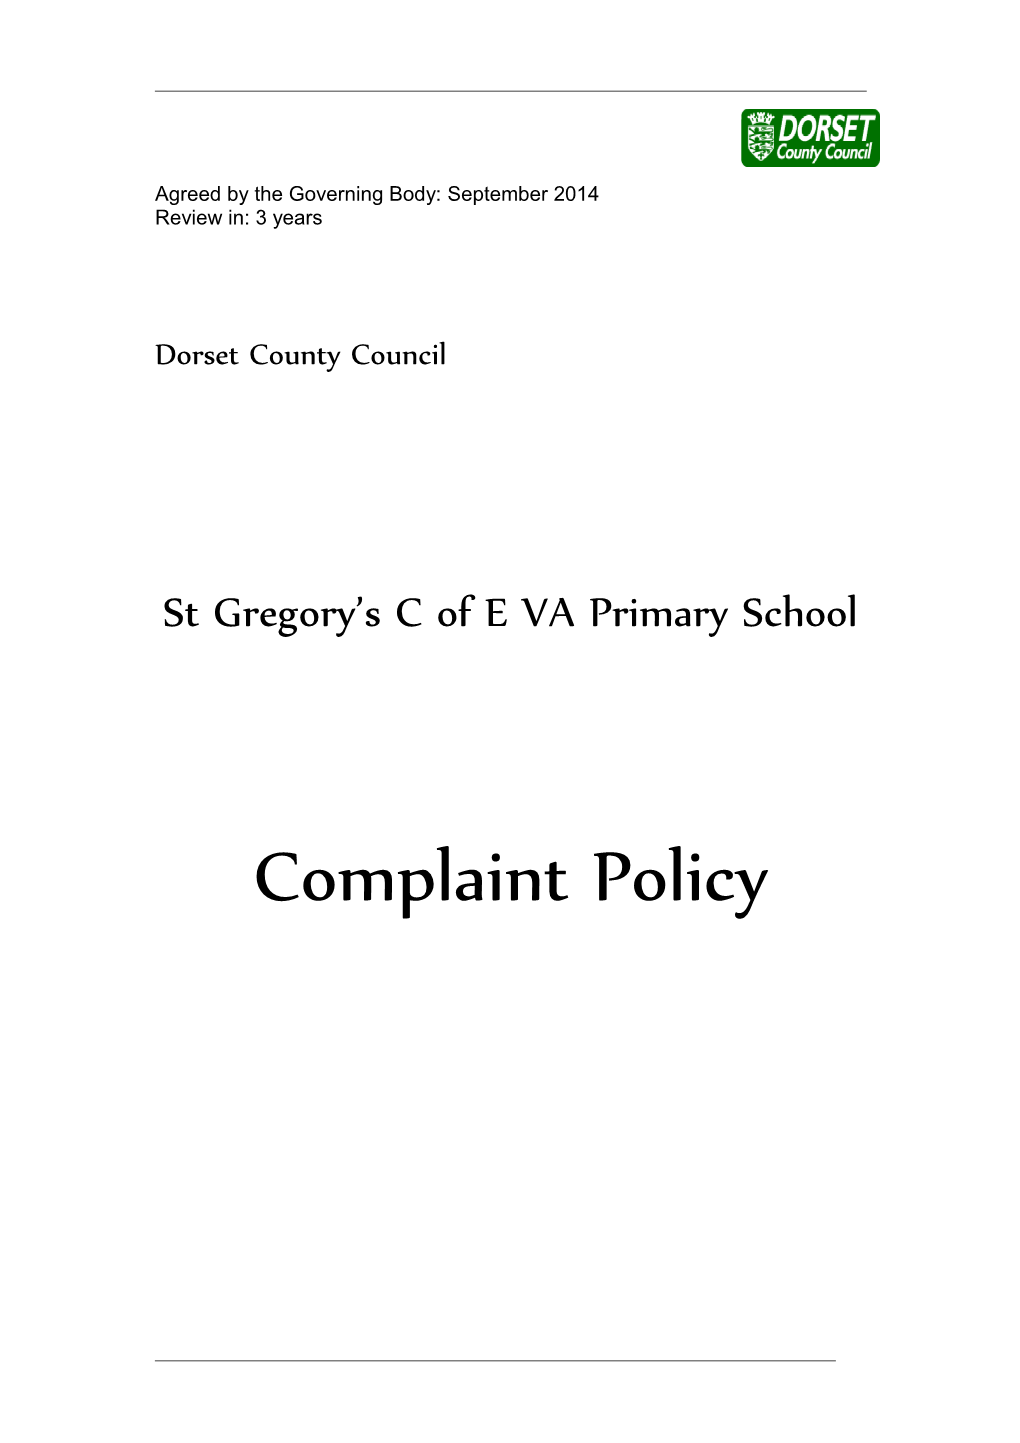 Framework for Complaints Policy